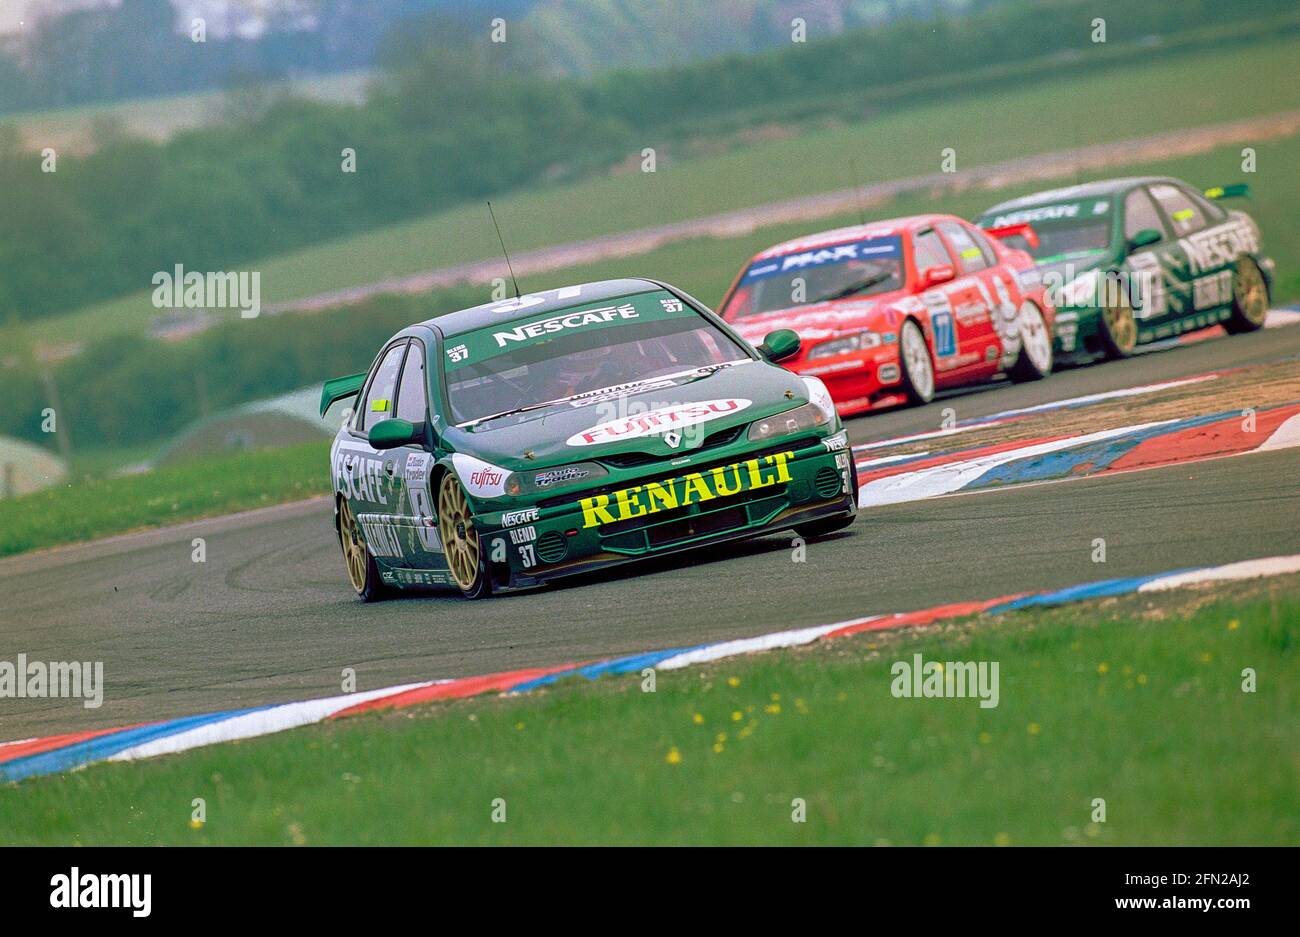 Jean Christopher Boullion in Rounds 5 and 6 in the BTCC championship at Thruxton Circuit in 1999 Stock Photo